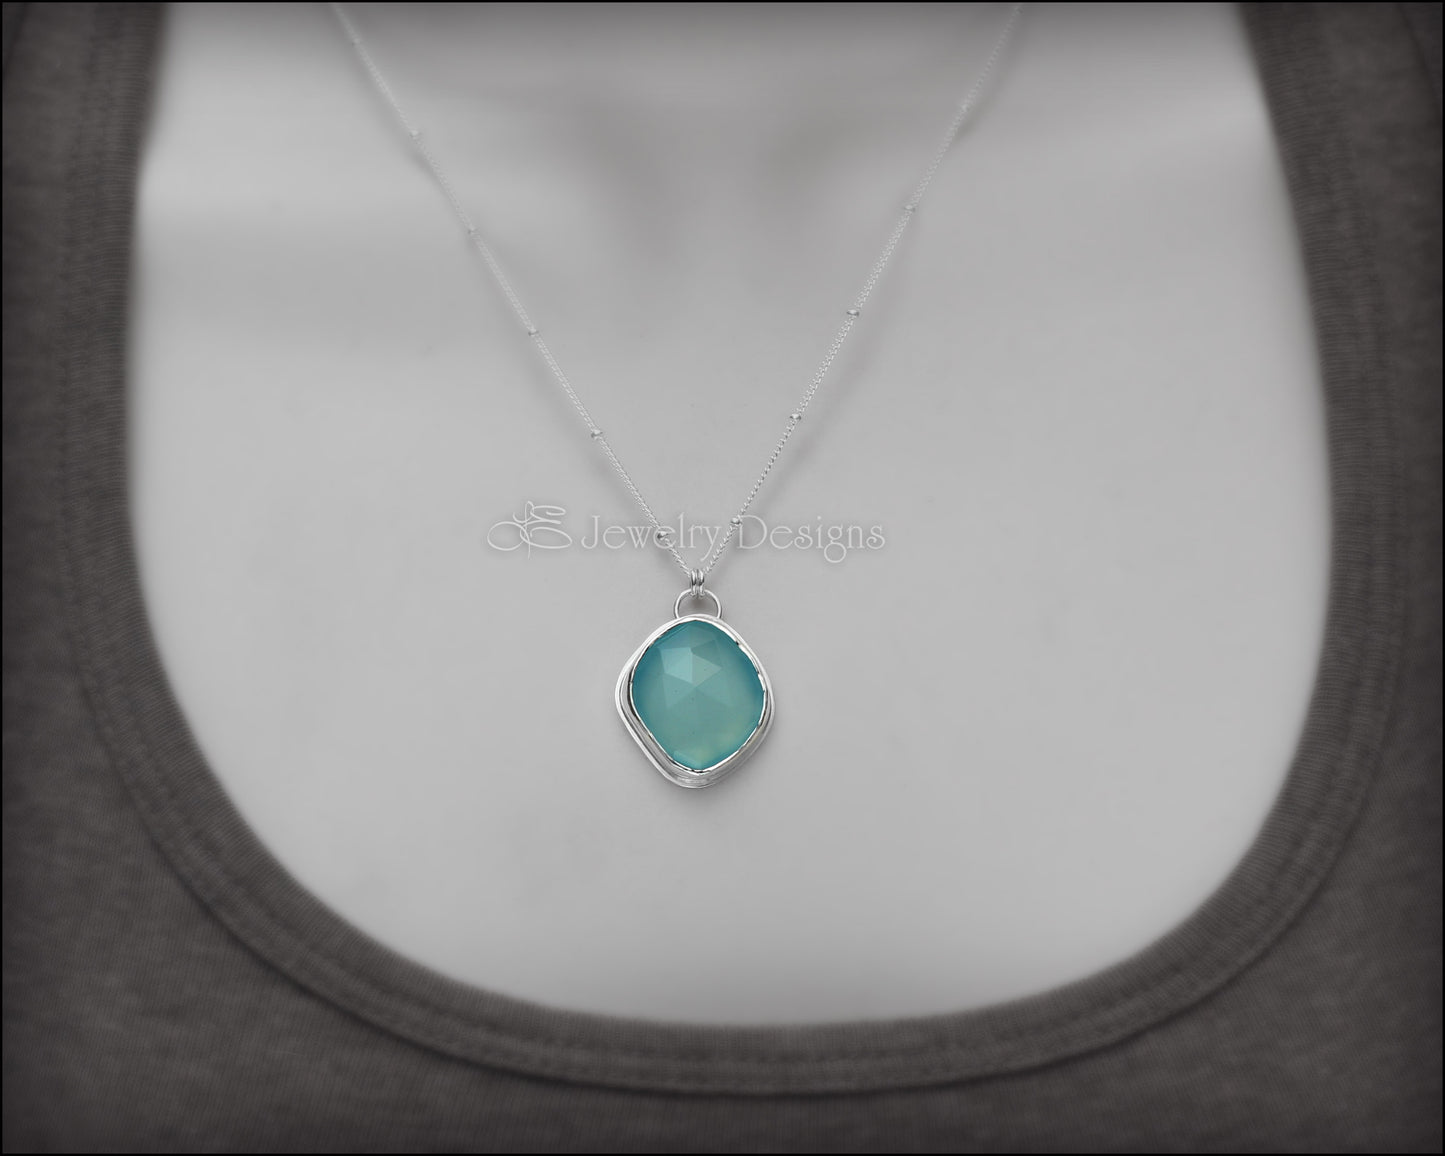 Load image into Gallery viewer, Sterling Silver Aqua Chalcedony Necklace - LE Jewelry Designs
